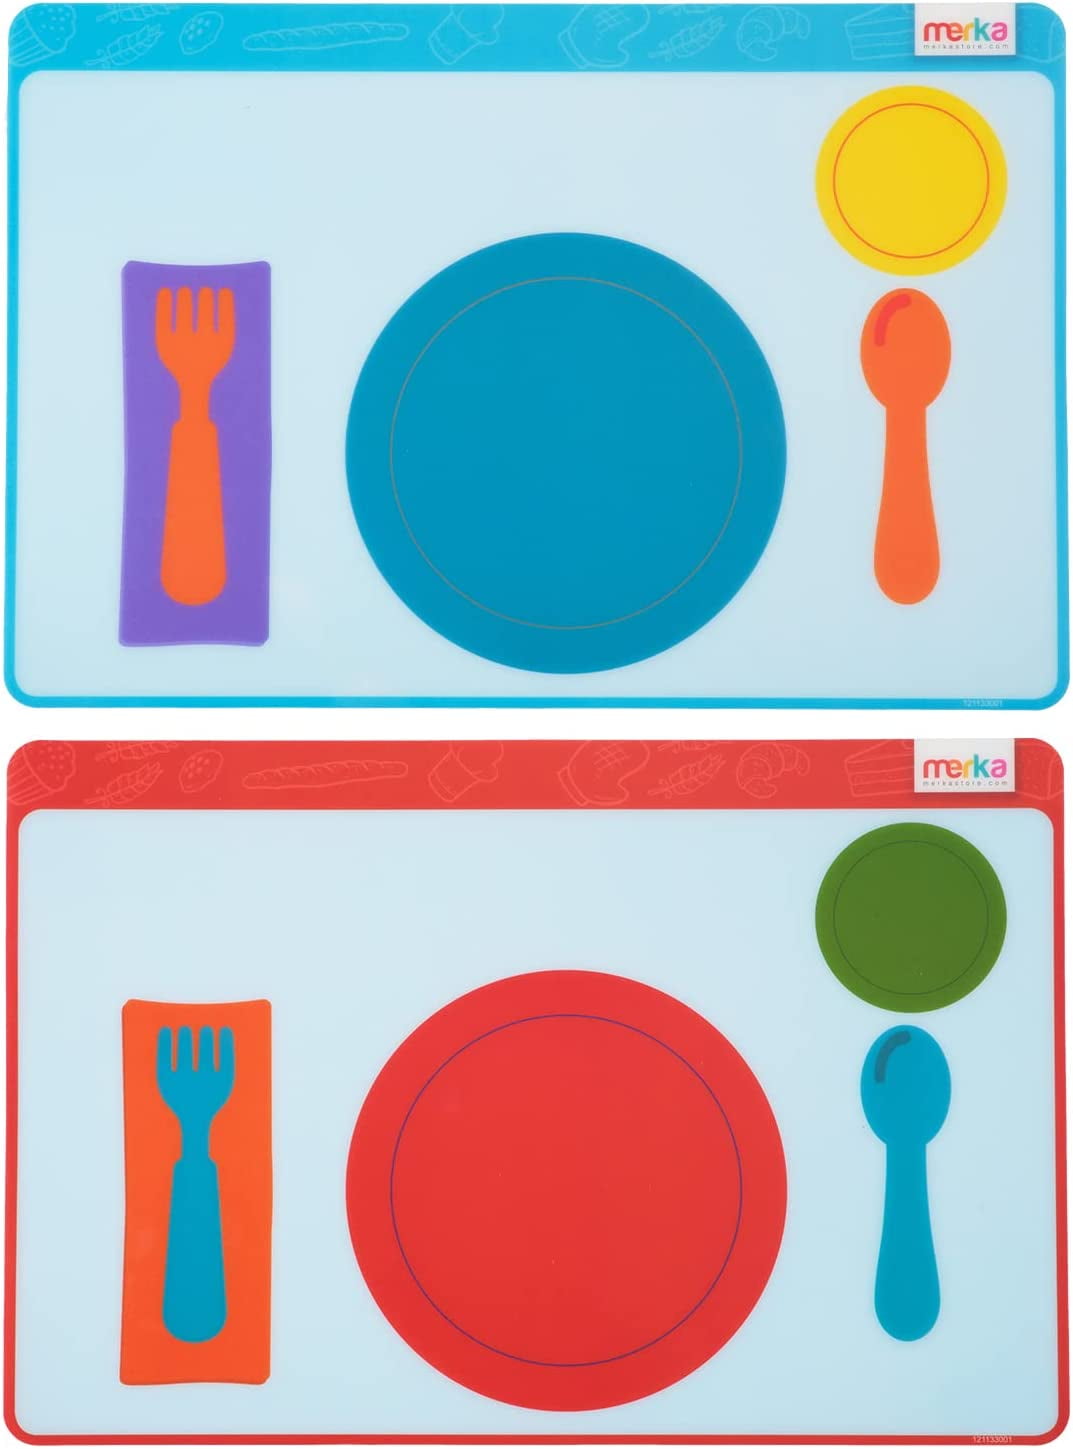 merka Kids Silicone Placemats for Dining Table: Montessori Non-Stick Placemats for Kids & Toddlers; Educational Table Mat Teaches Children Table Set of 2 Matching Toddler Placemats - Walmart.com